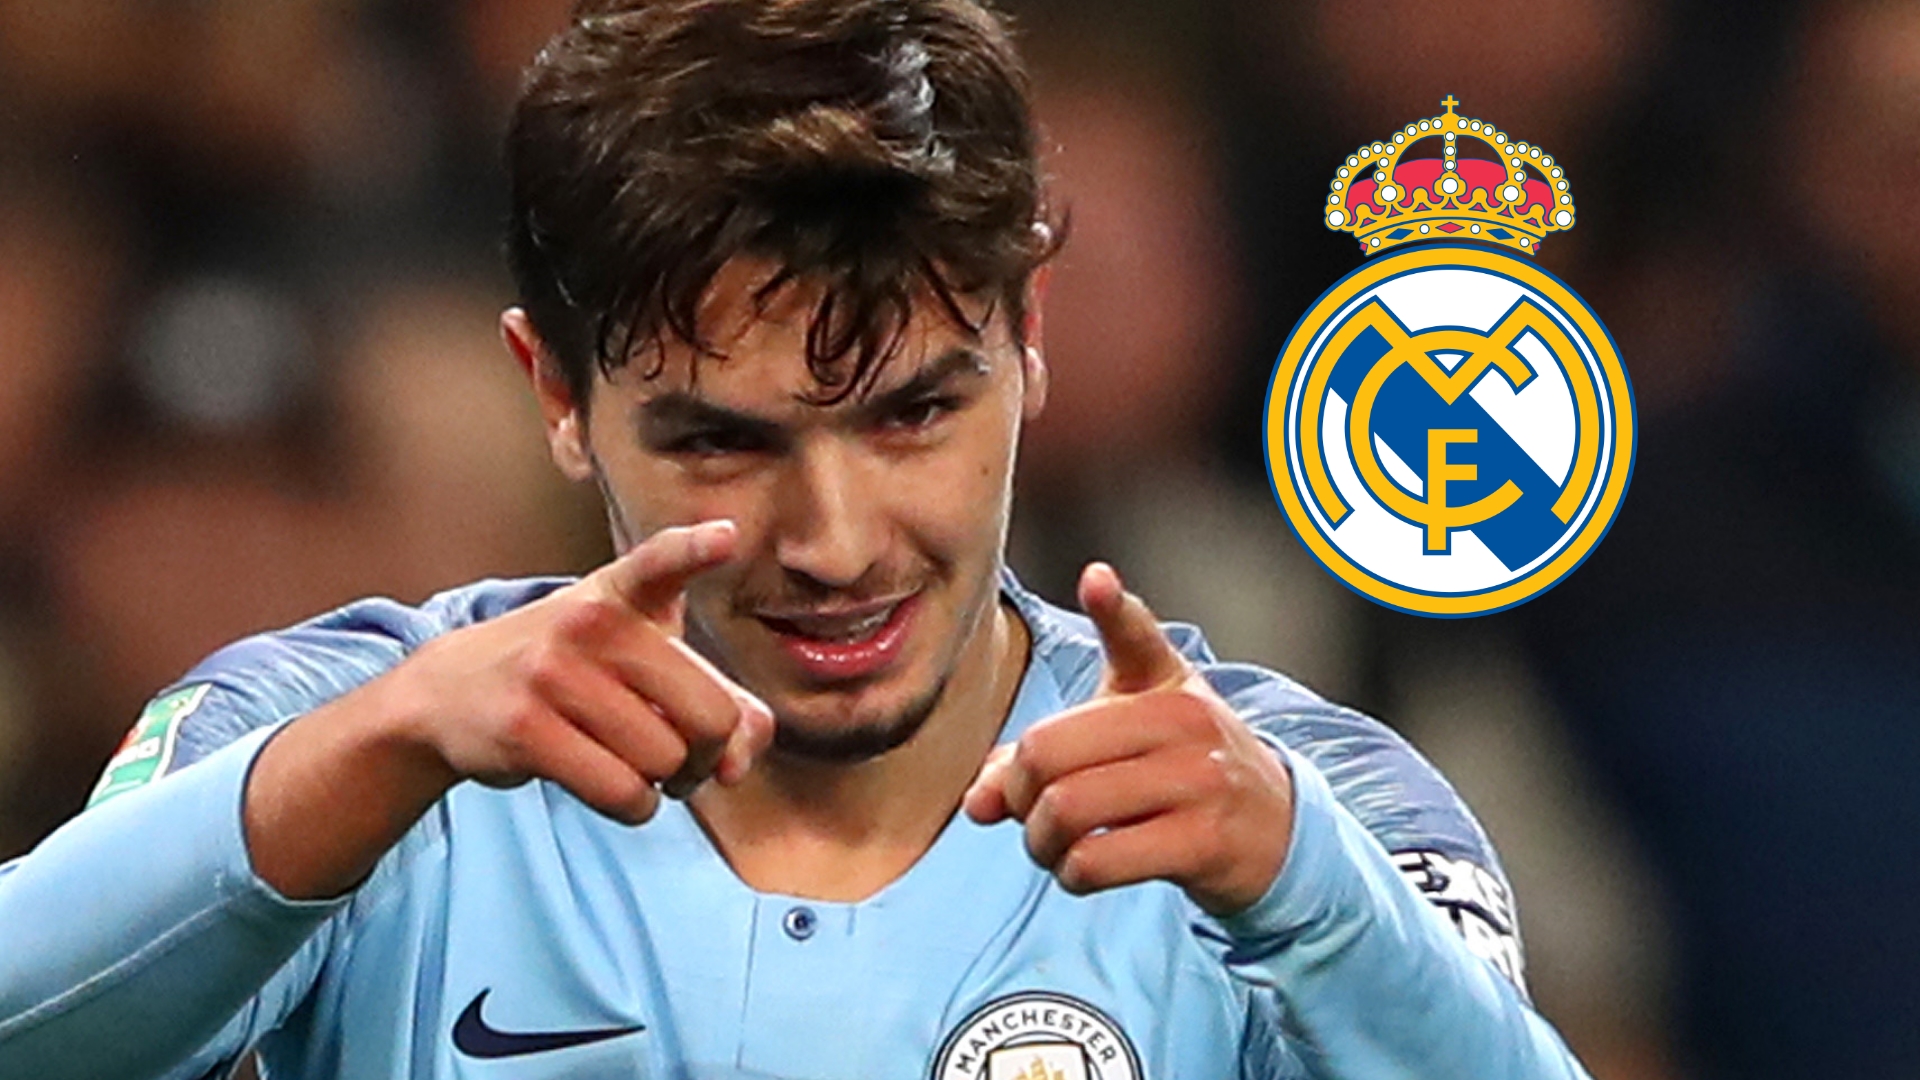 Image result for Man City youngster Brahim Diaz set for Real Madrid move